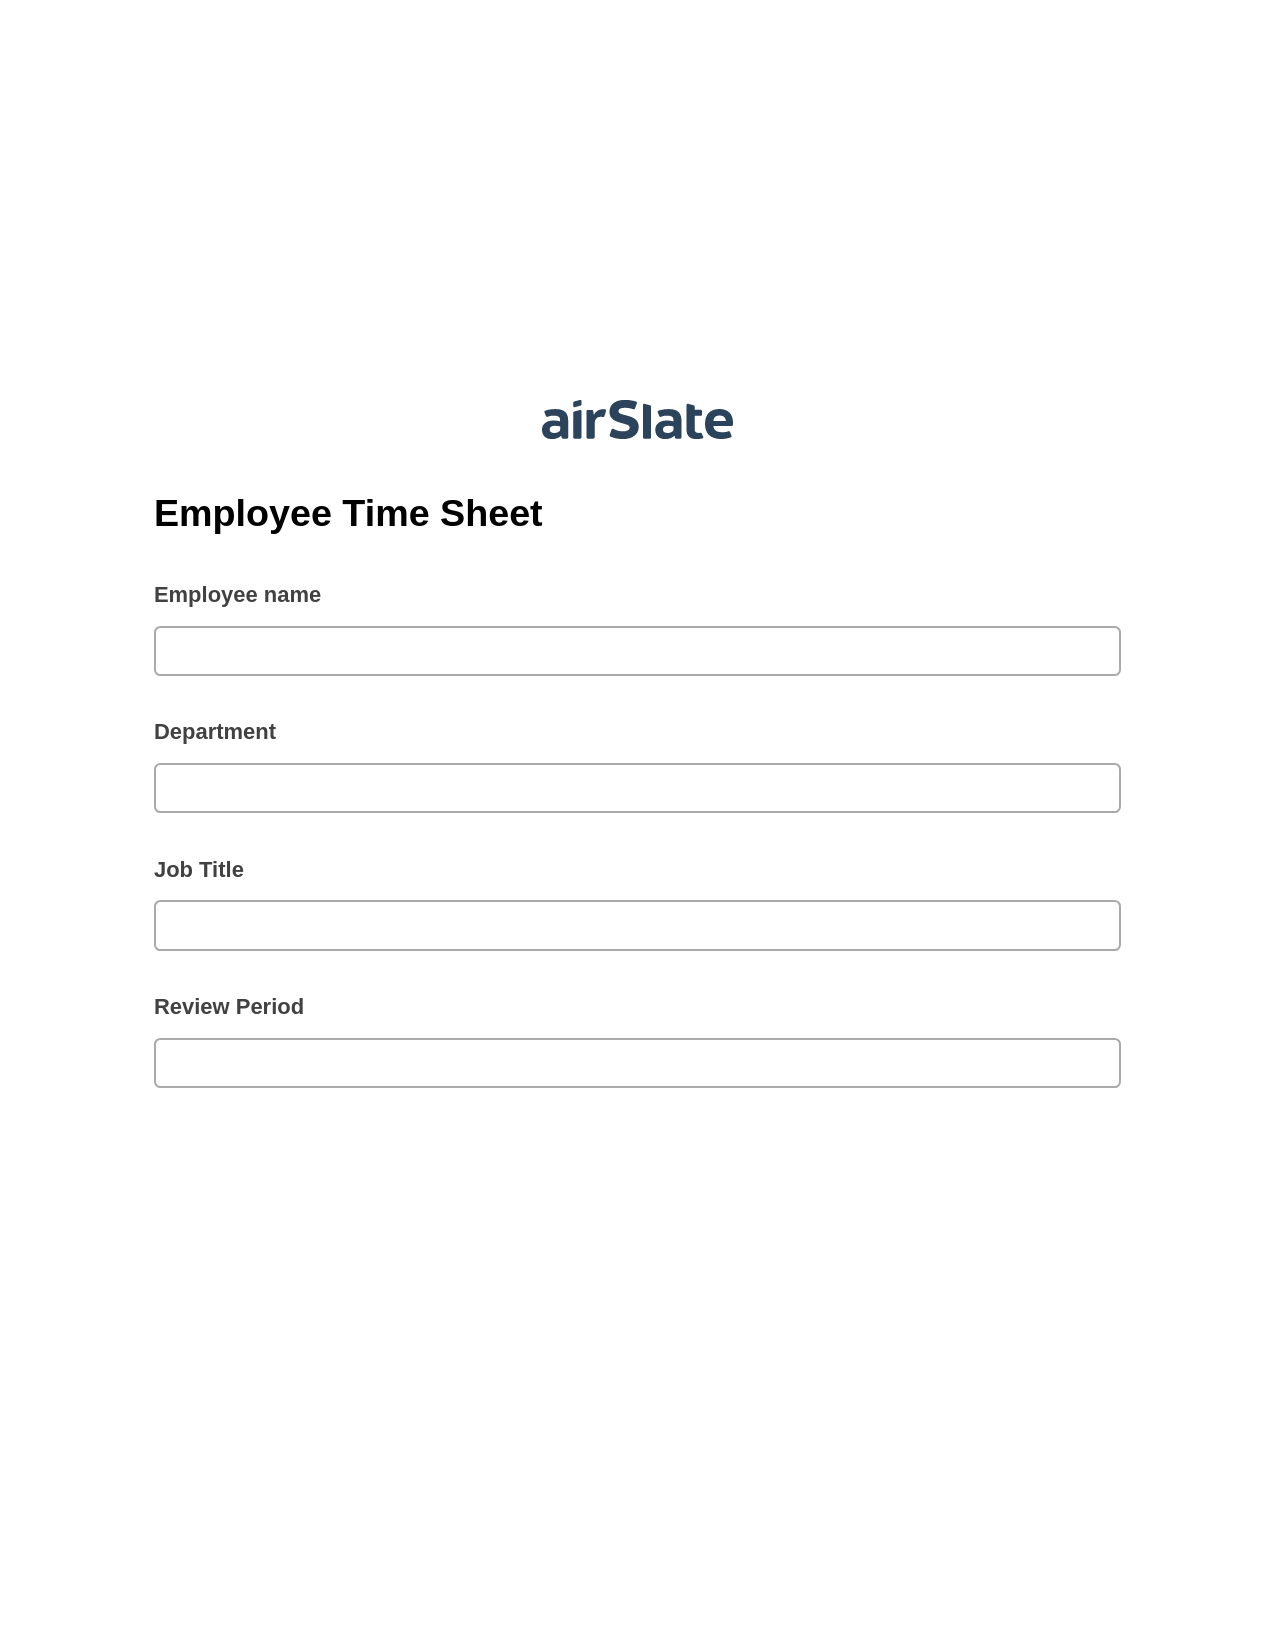 Multirole Employee Time Sheet Pre-fill from MS Dynamics 365 Records, Create slate addon, Archive to OneDrive Bot